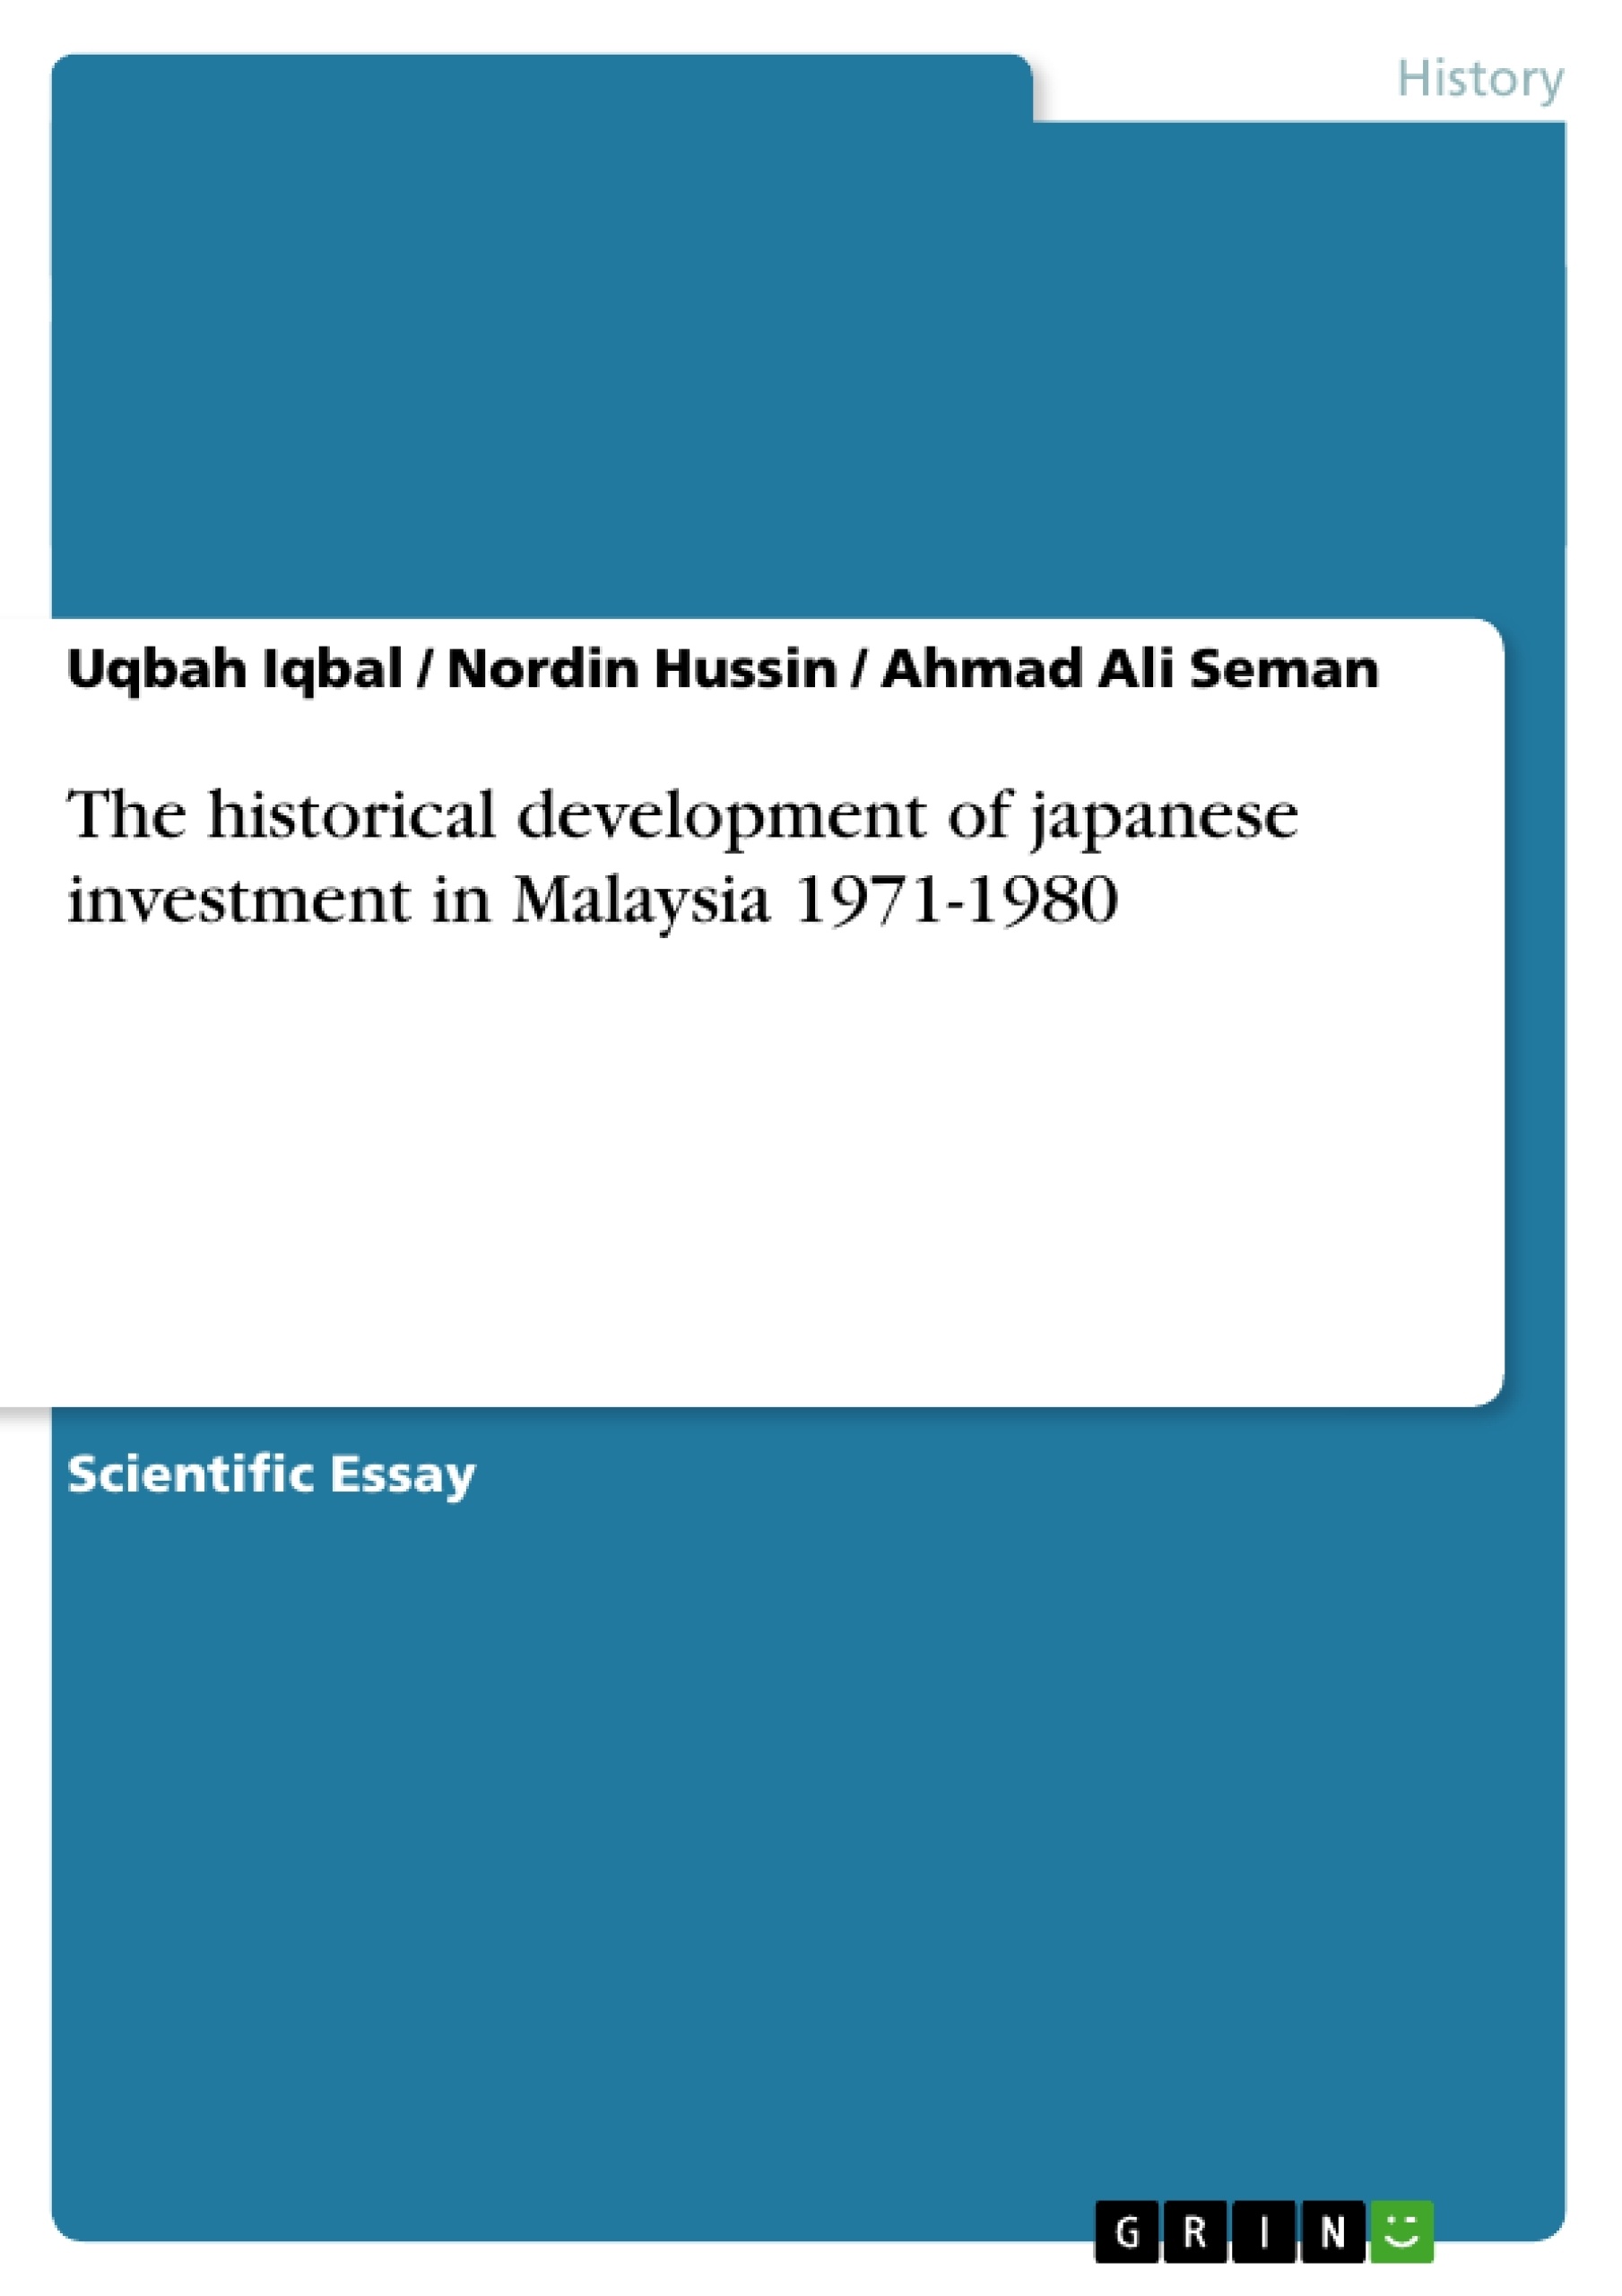 Titel: The historical development of japanese investment in Malaysia 1971-1980